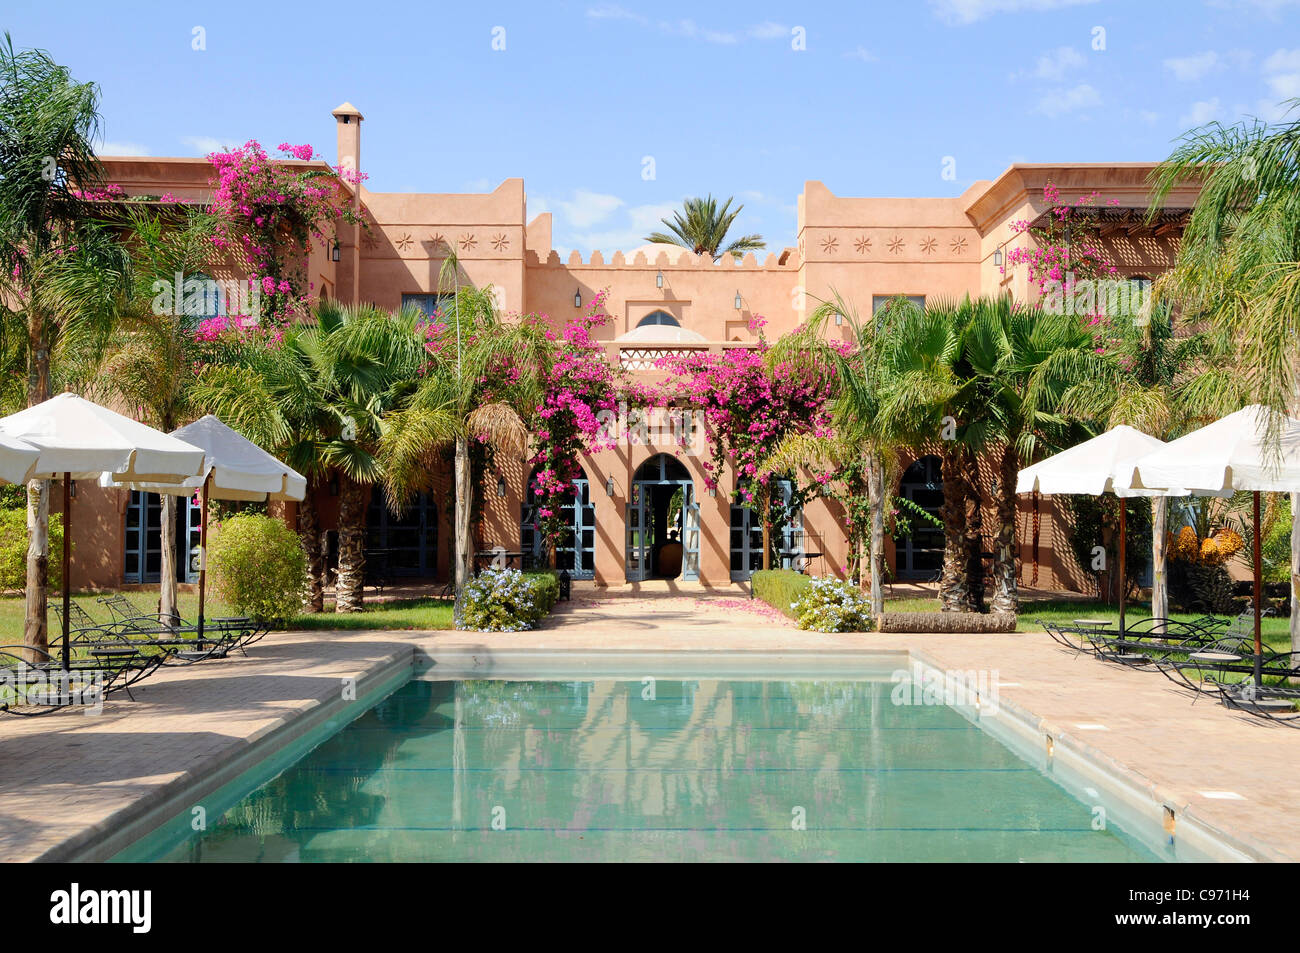 A riad in the Palmeraie district of Marrakesh, Morocco. 'Riads' are grandiose villa or a palace with great garden or courtyards. Stock Photo